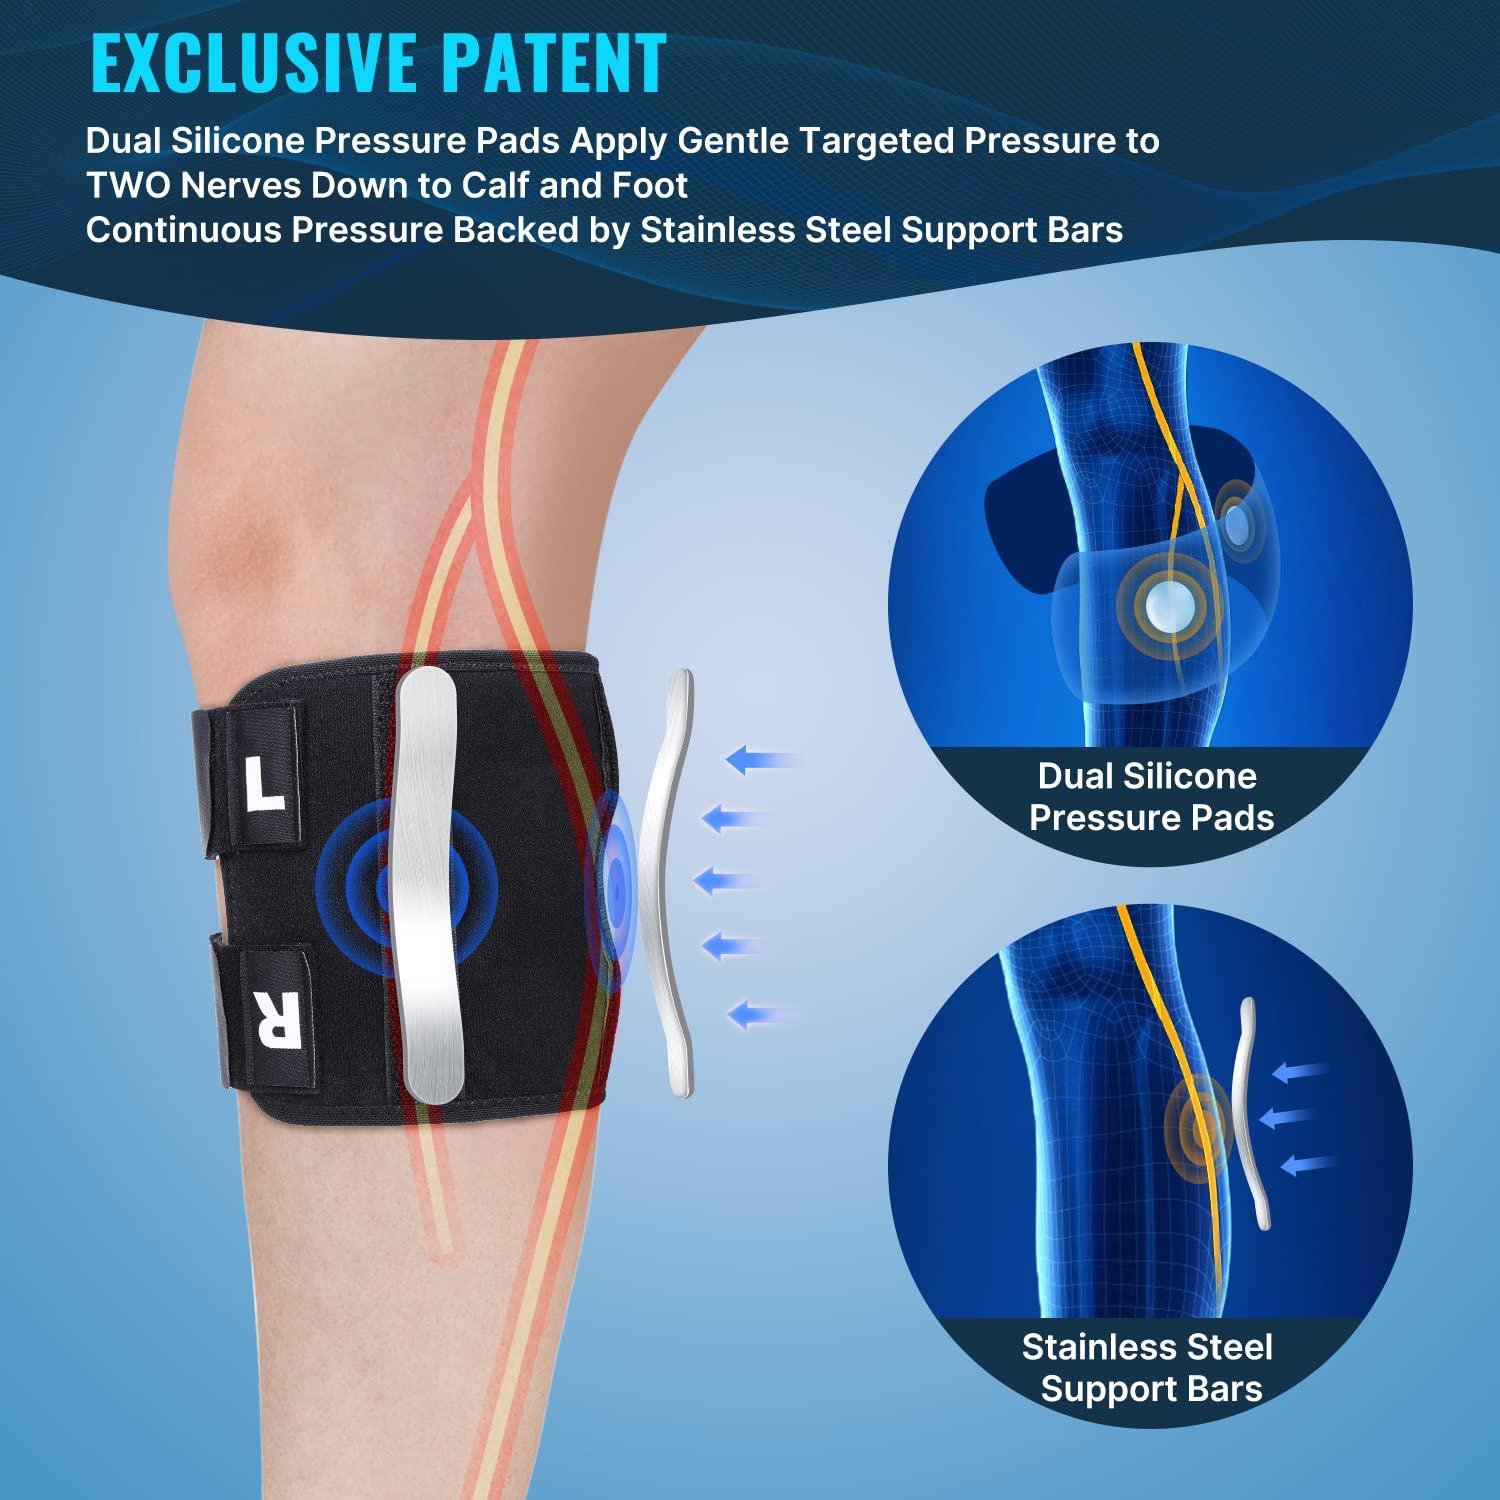 Sciatica Pain Relief Devices - 2023 Best Sciatic Pain Relief , Knee Brace for Sciatica As Seen on TV, Acupressure System for Instant Relief from